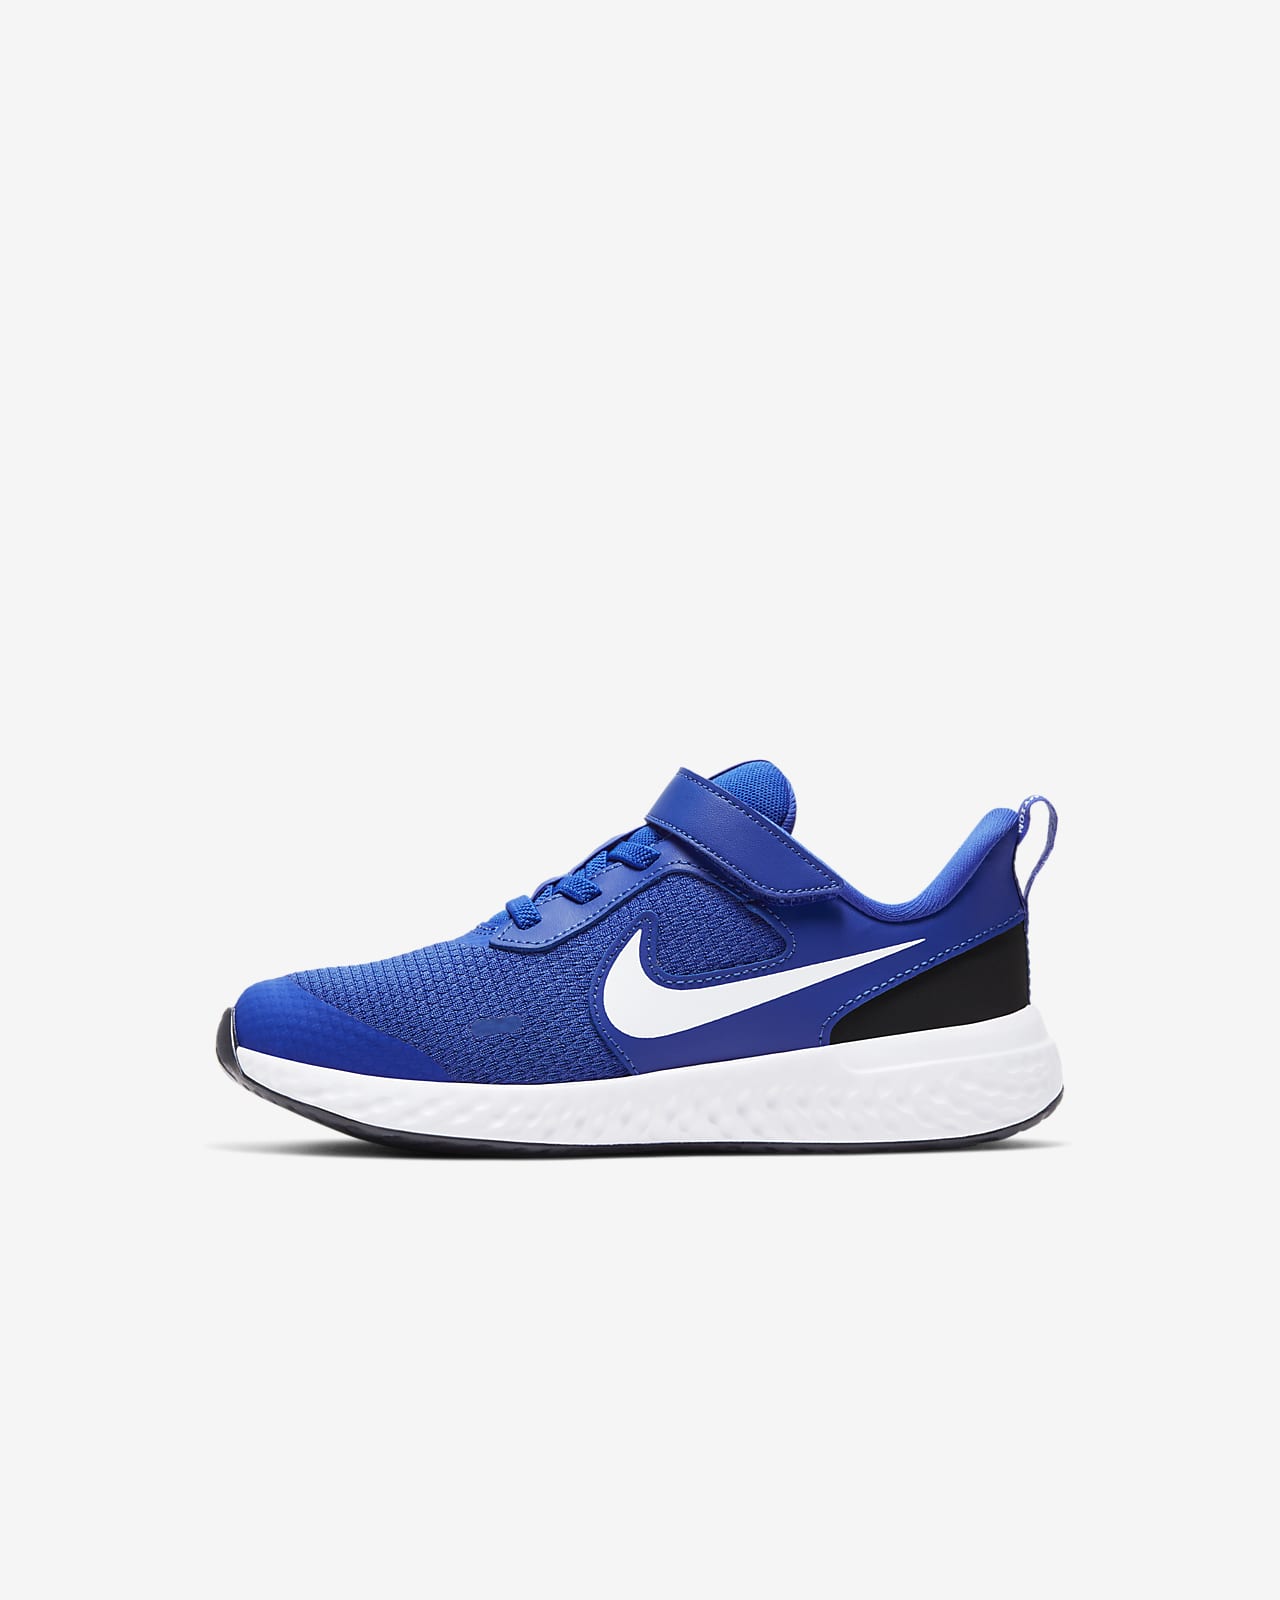 nike all blue shoes